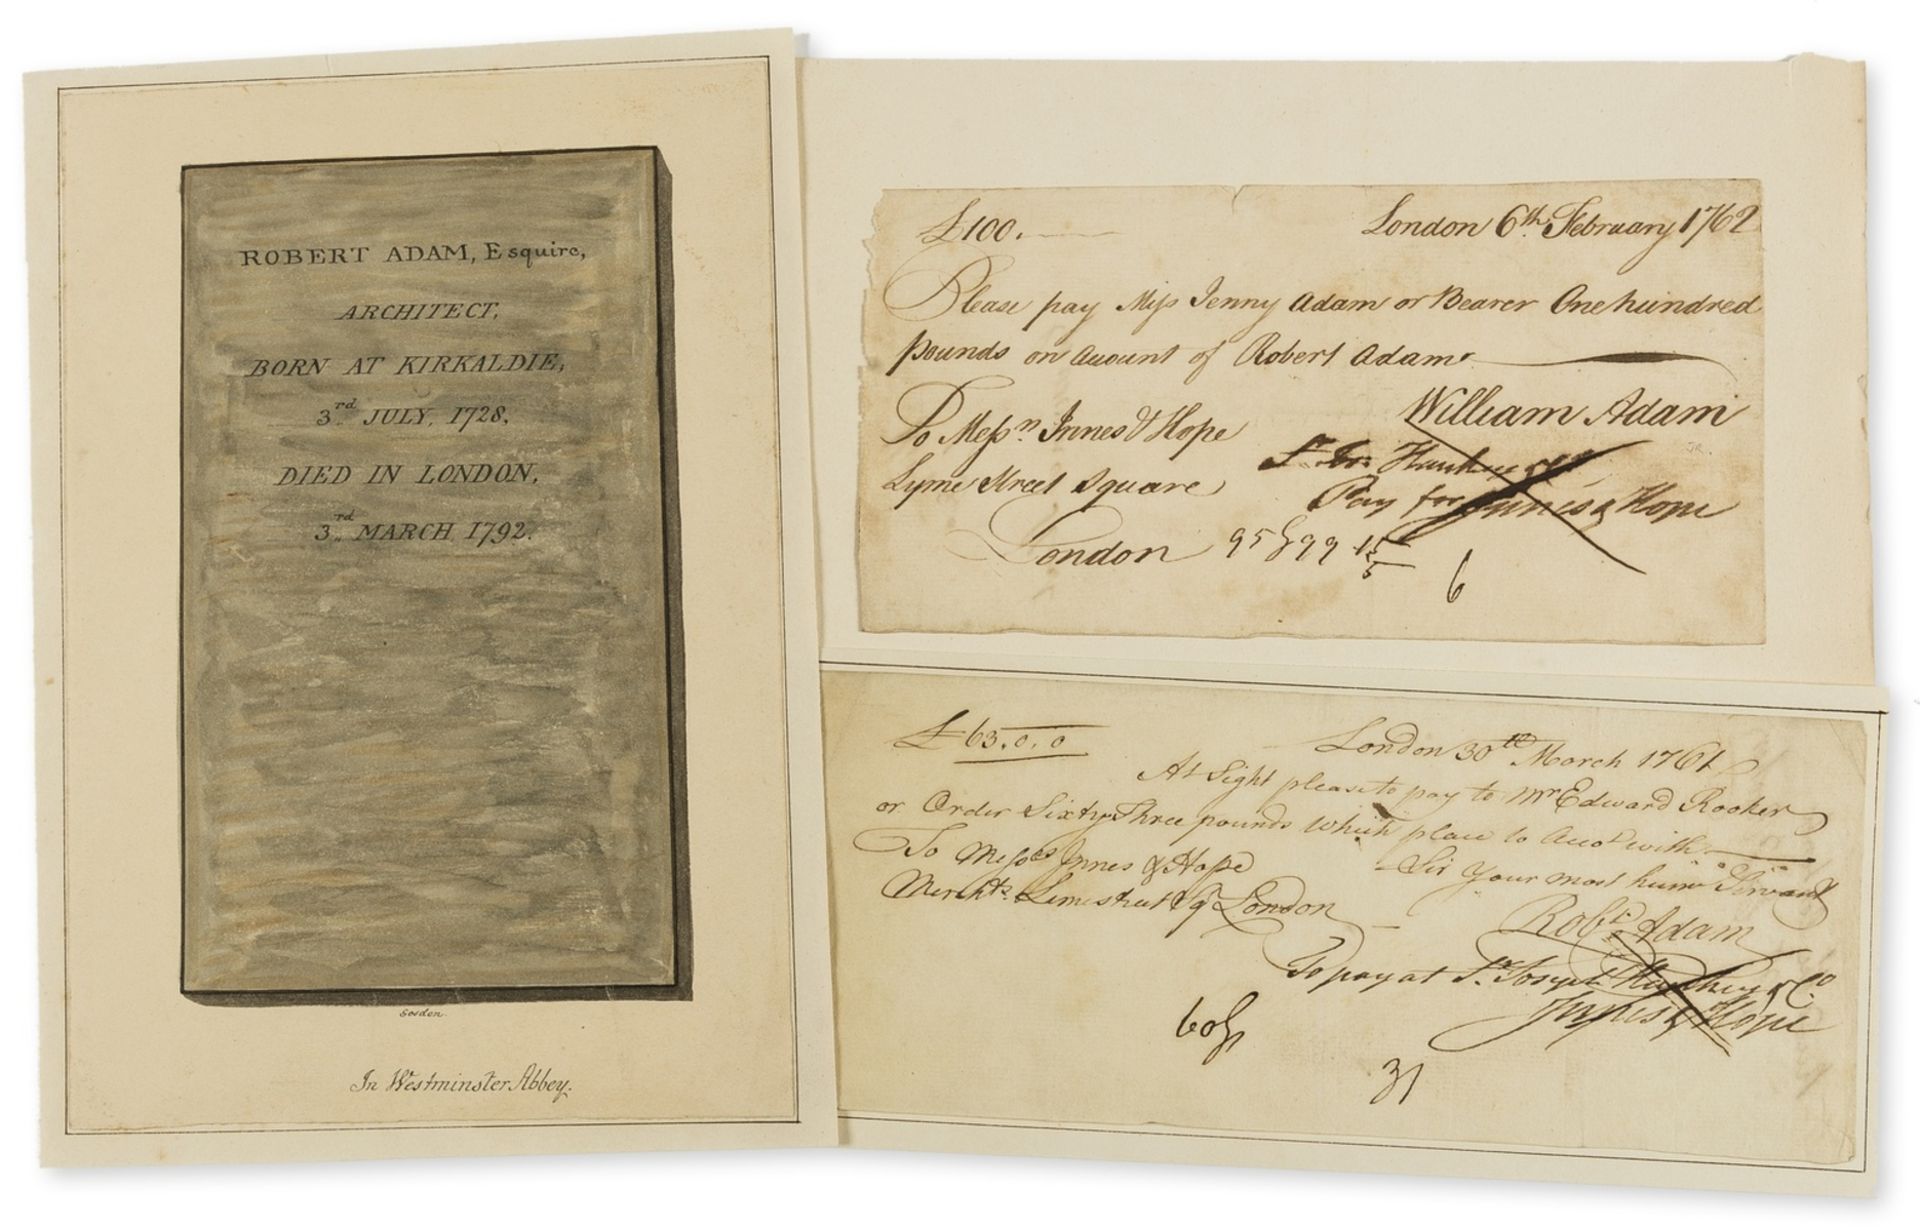 Adam (Robert) Cheque signed made payable to Edward Rooker for sixty-three pounds, drawn on Messrs …